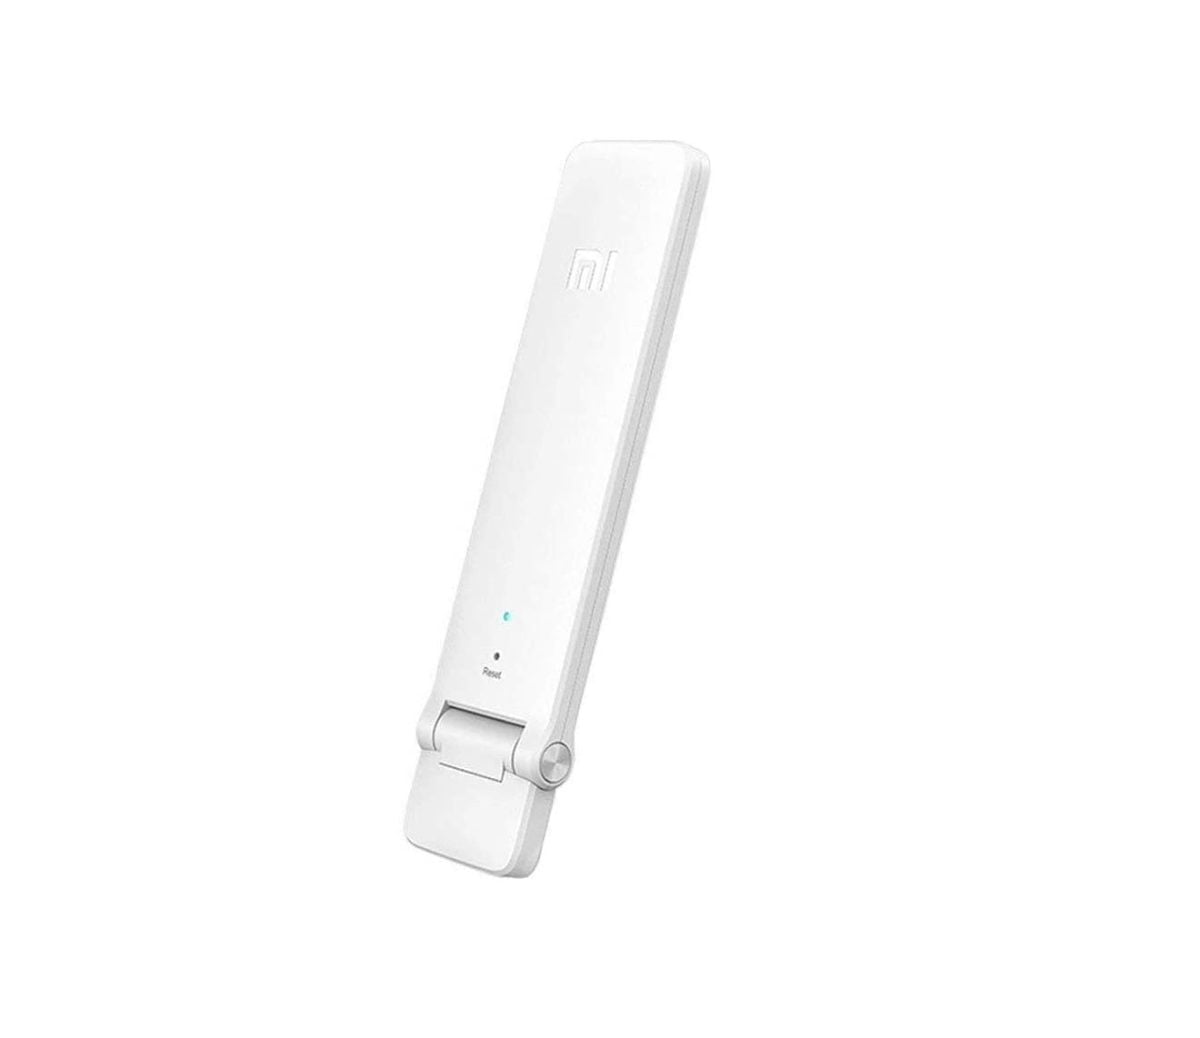 Xiaomi The Xiaomi Wifi Repeater Has The Ability To Connect Up To 16 Devices At One Time Without Compromising The Speed Of Connectively. Enhances Wi-Fi Signal For Lag-Free Streaming And Gaming Etc With No Need To Switch The Hotspot. Boosts The Coverage Of Your Existing Wi-Fi Signal Up To 2 Times. &Nbsp; Xiaomi Mi Wifi Repeater 2 - 300Mbps Wi-Fi Range Extender Amplifier (Wi-Fi Booster)